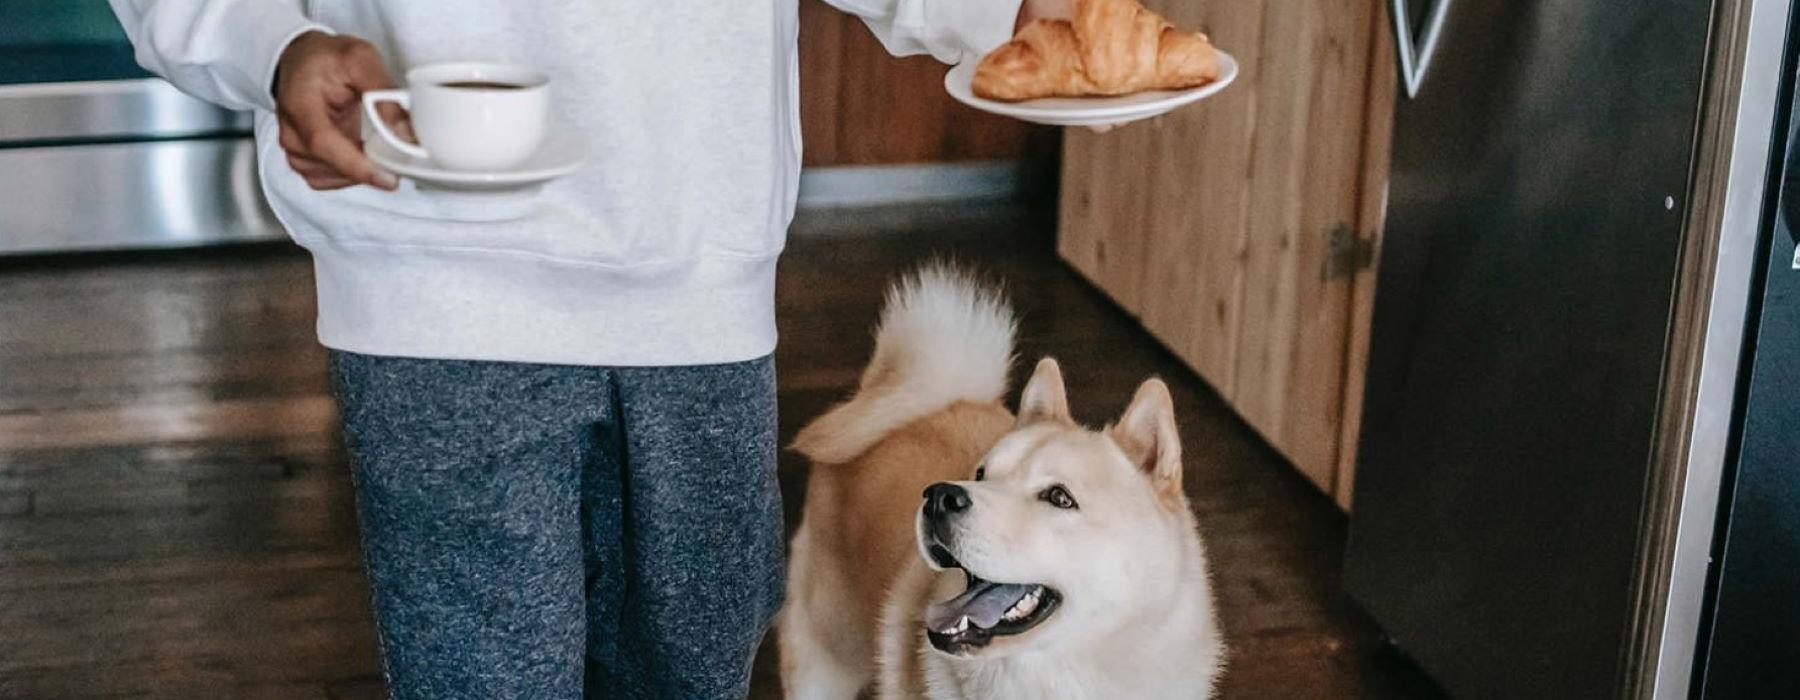 a dog and a person holding a plate of food